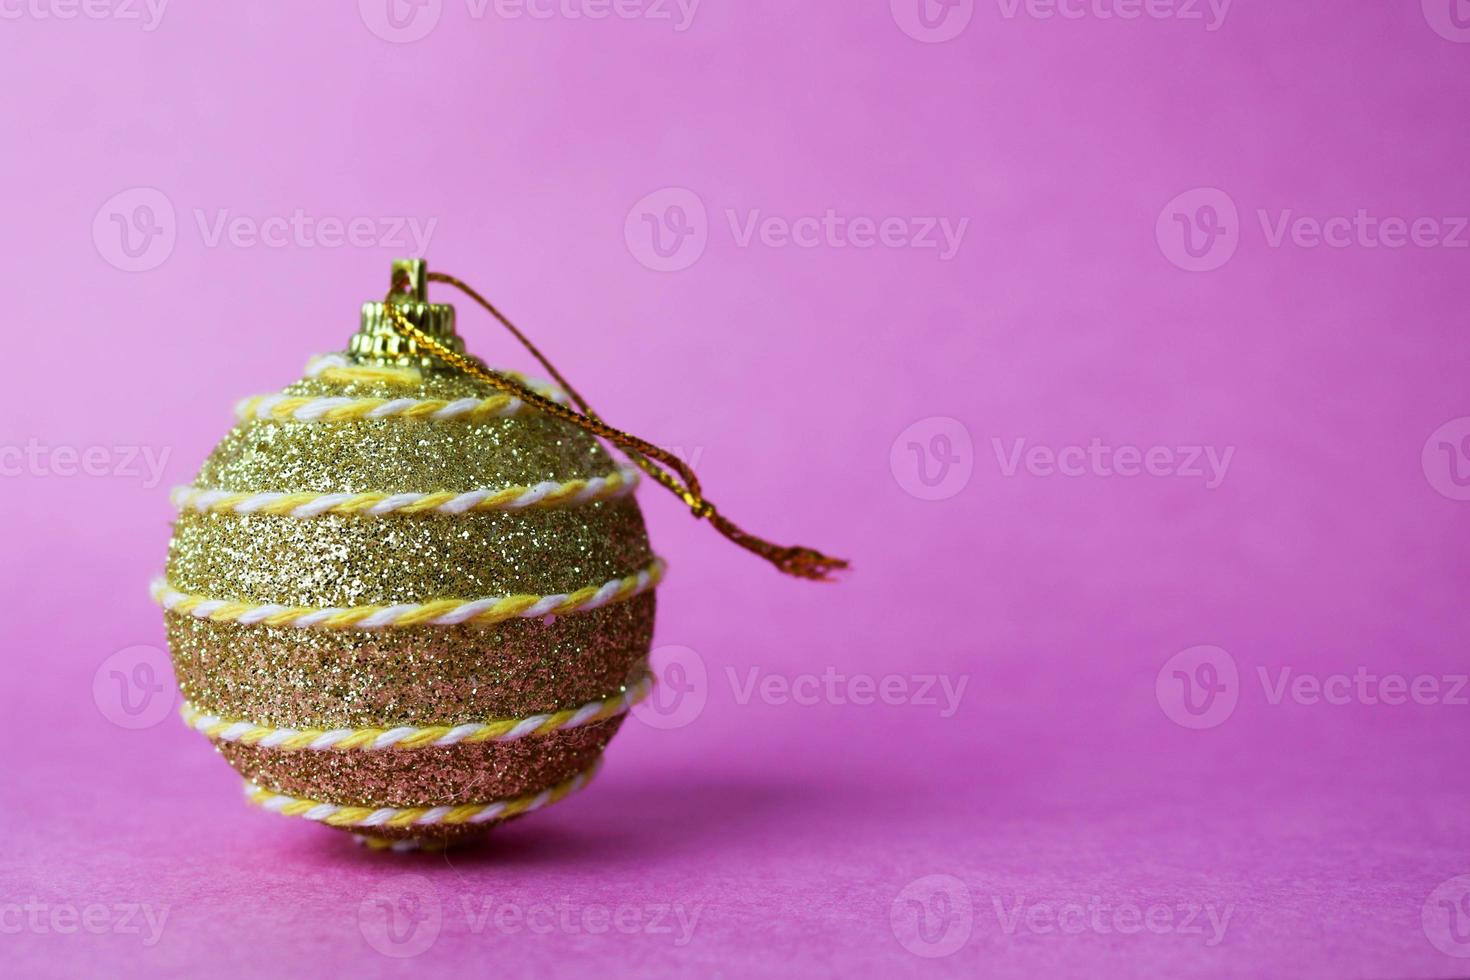 Golden yellow small round glass plastic winter smart shiny decorative beautiful xmas festive Christmas ball, Christmas toy pasted over with spangles on a violet pink background photo